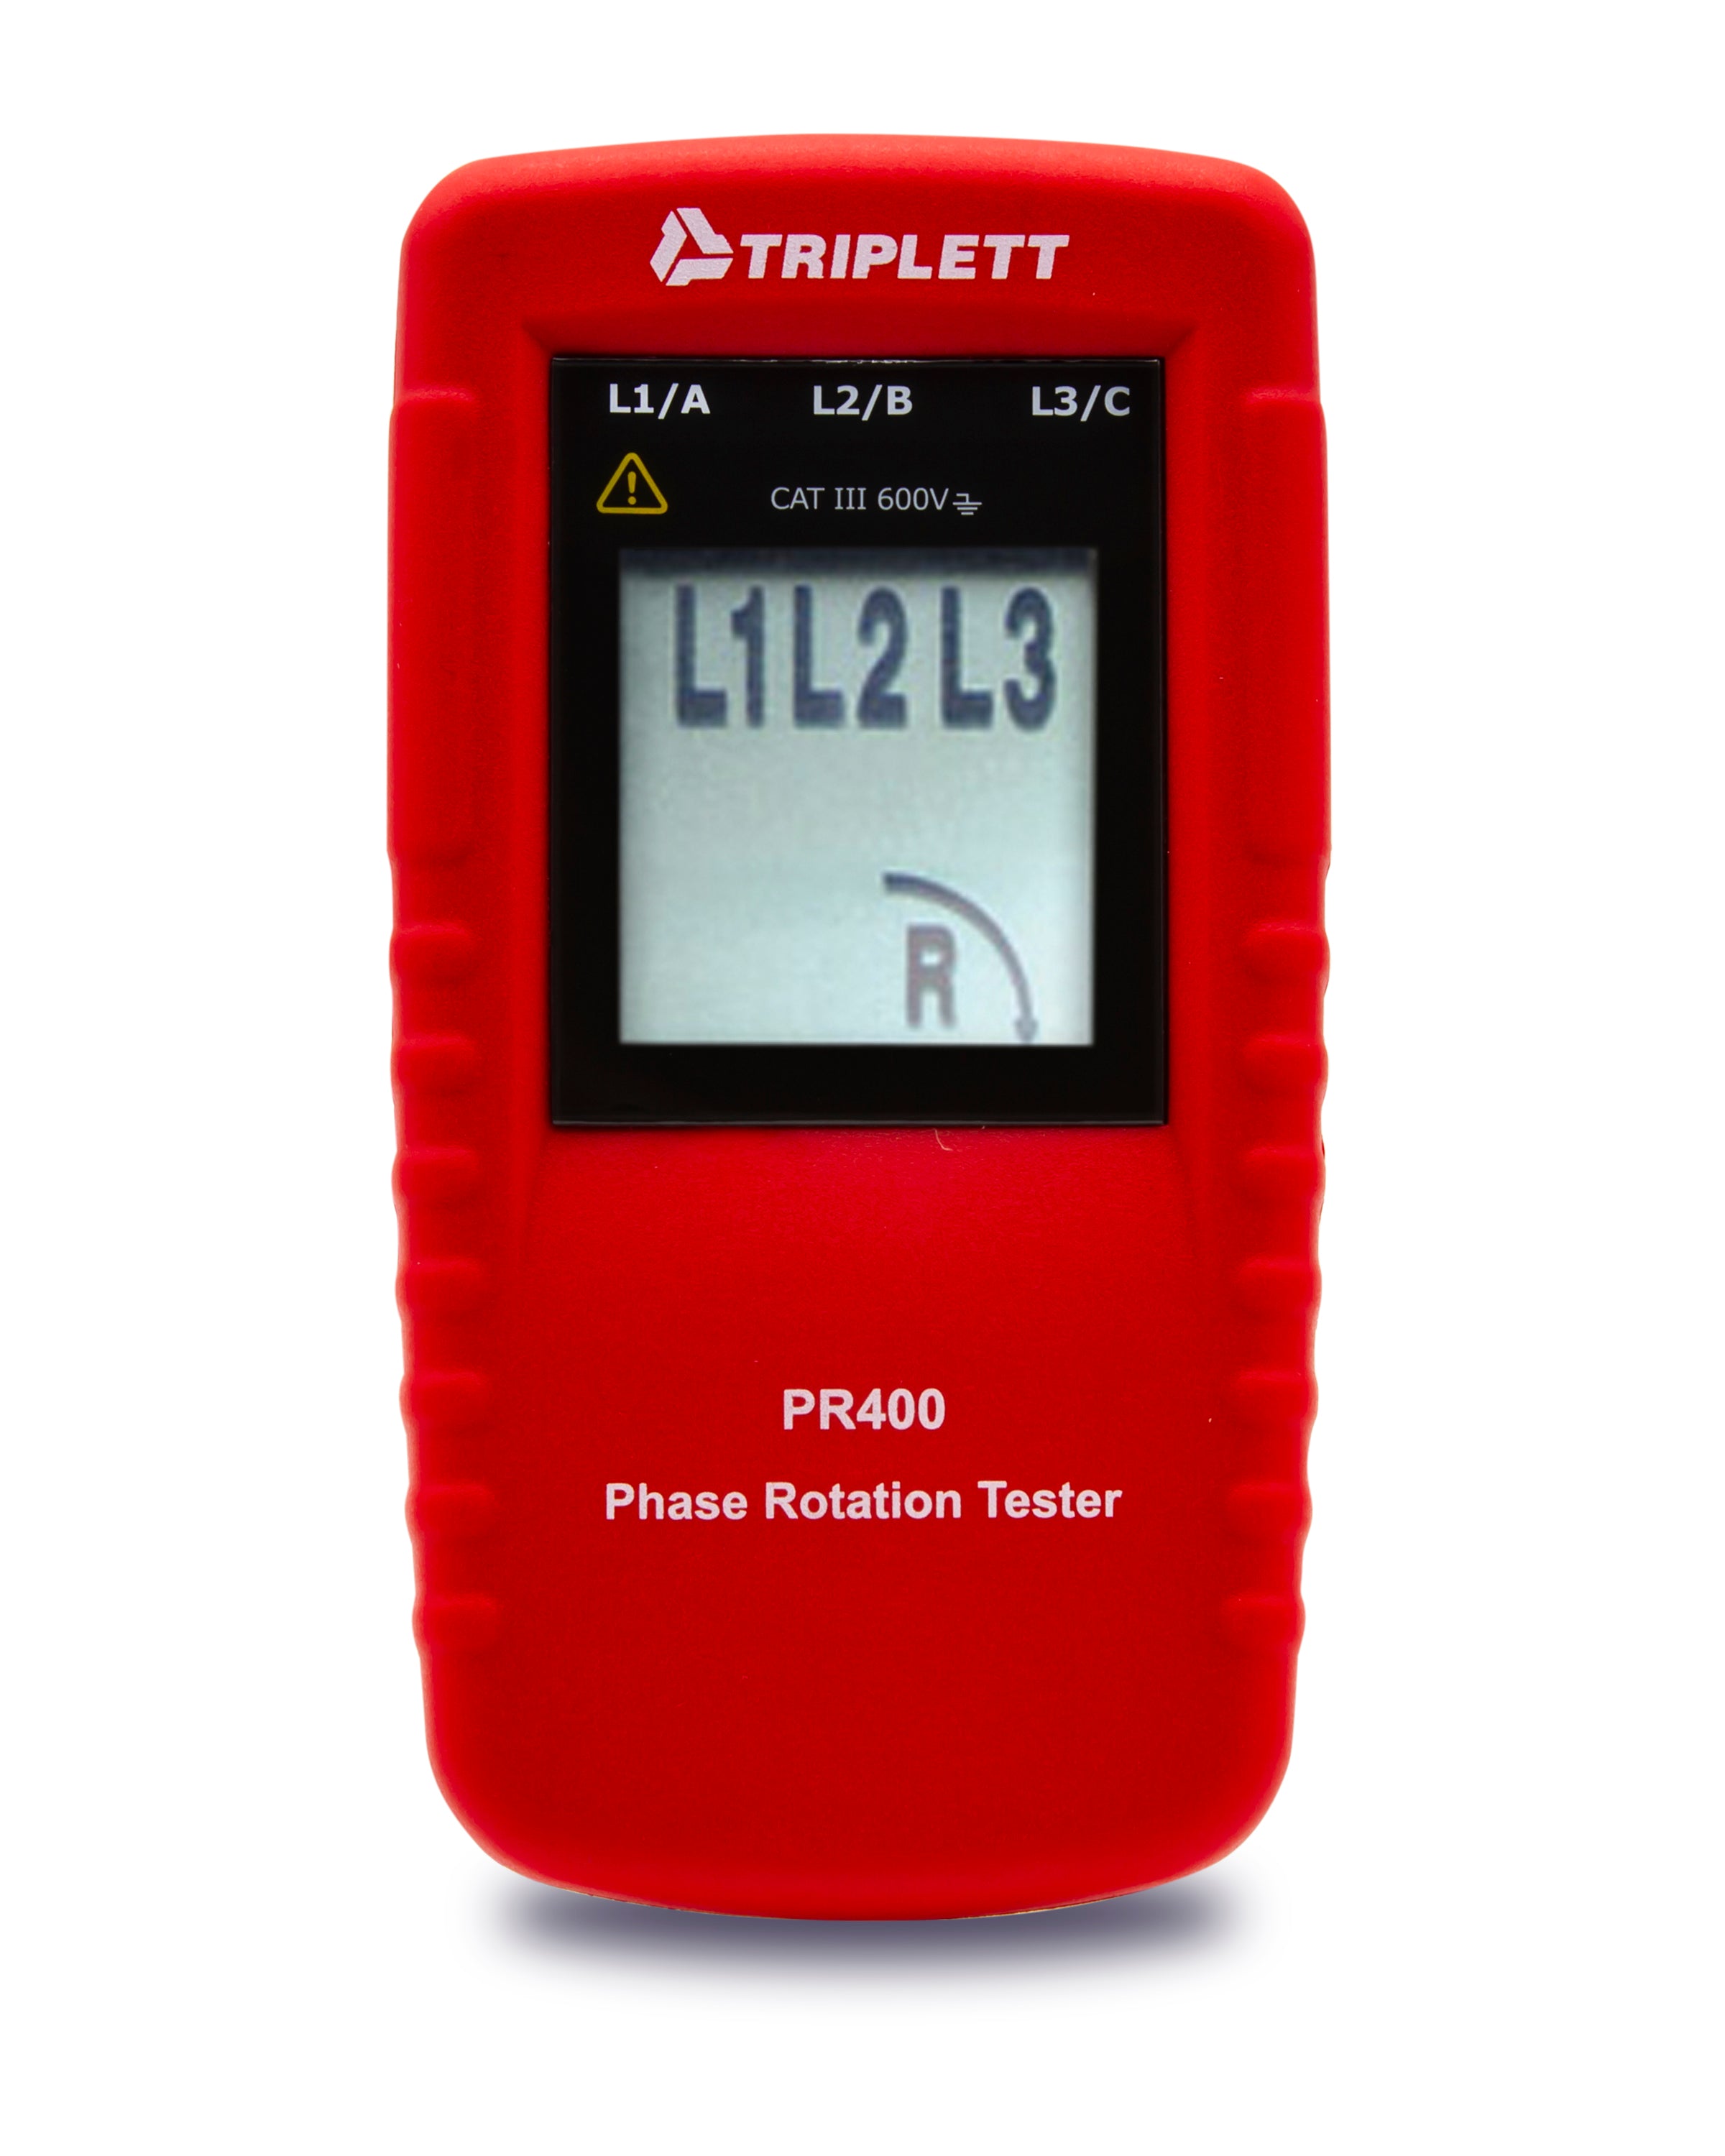 Phase Rotation Tester: Determines Correct Phase Wiring Sequence